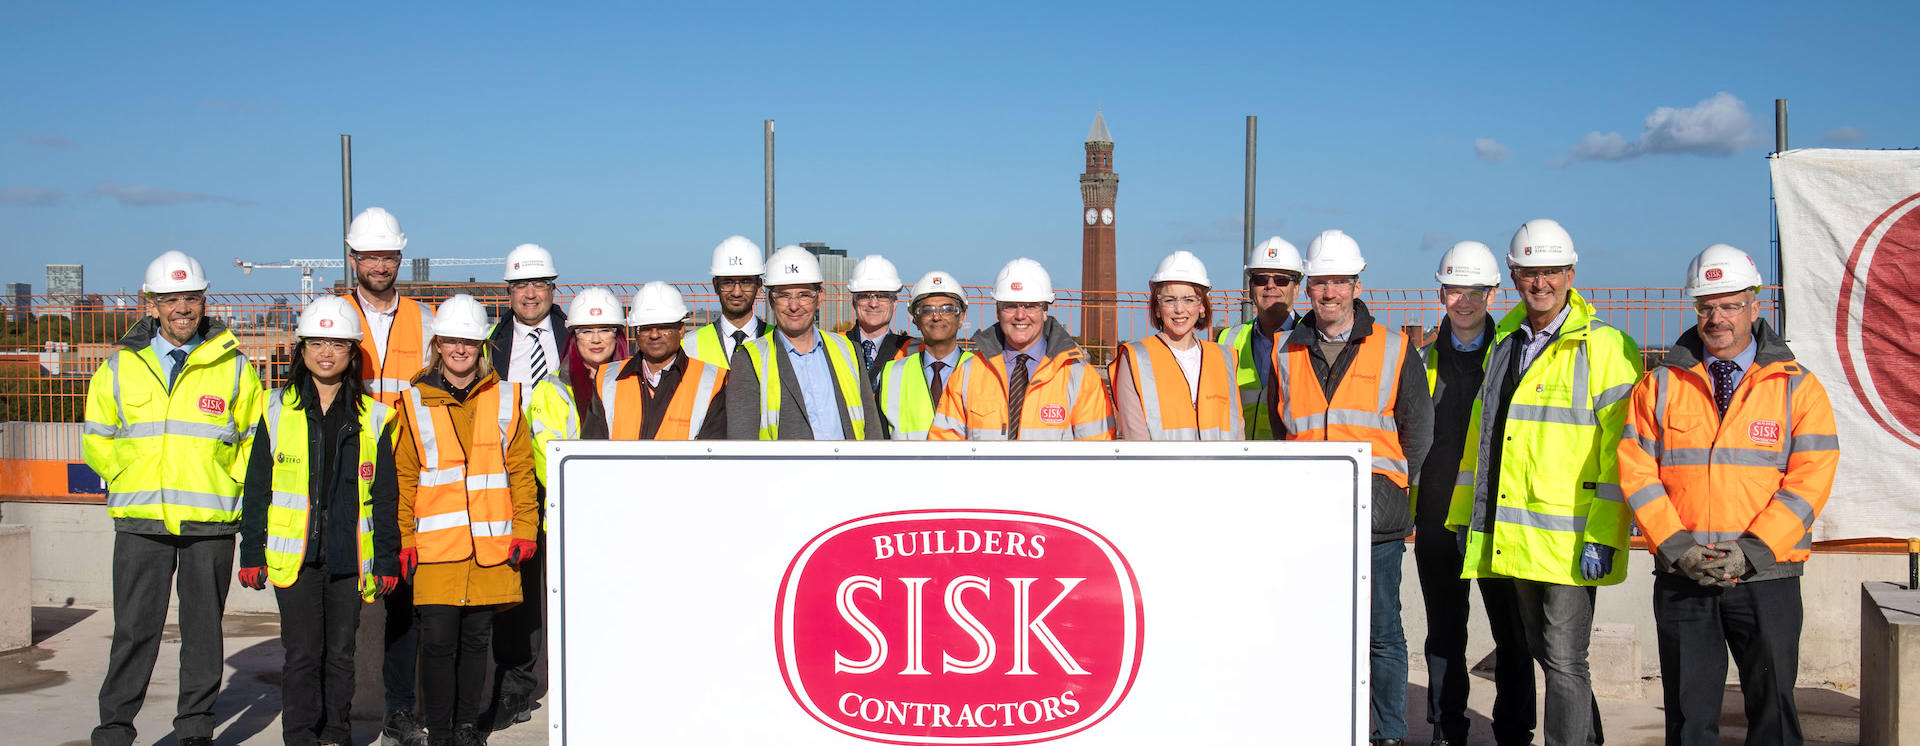 Group of people wearing high vis stand on top of No.1 BHIC building celebrating topping out ceremony